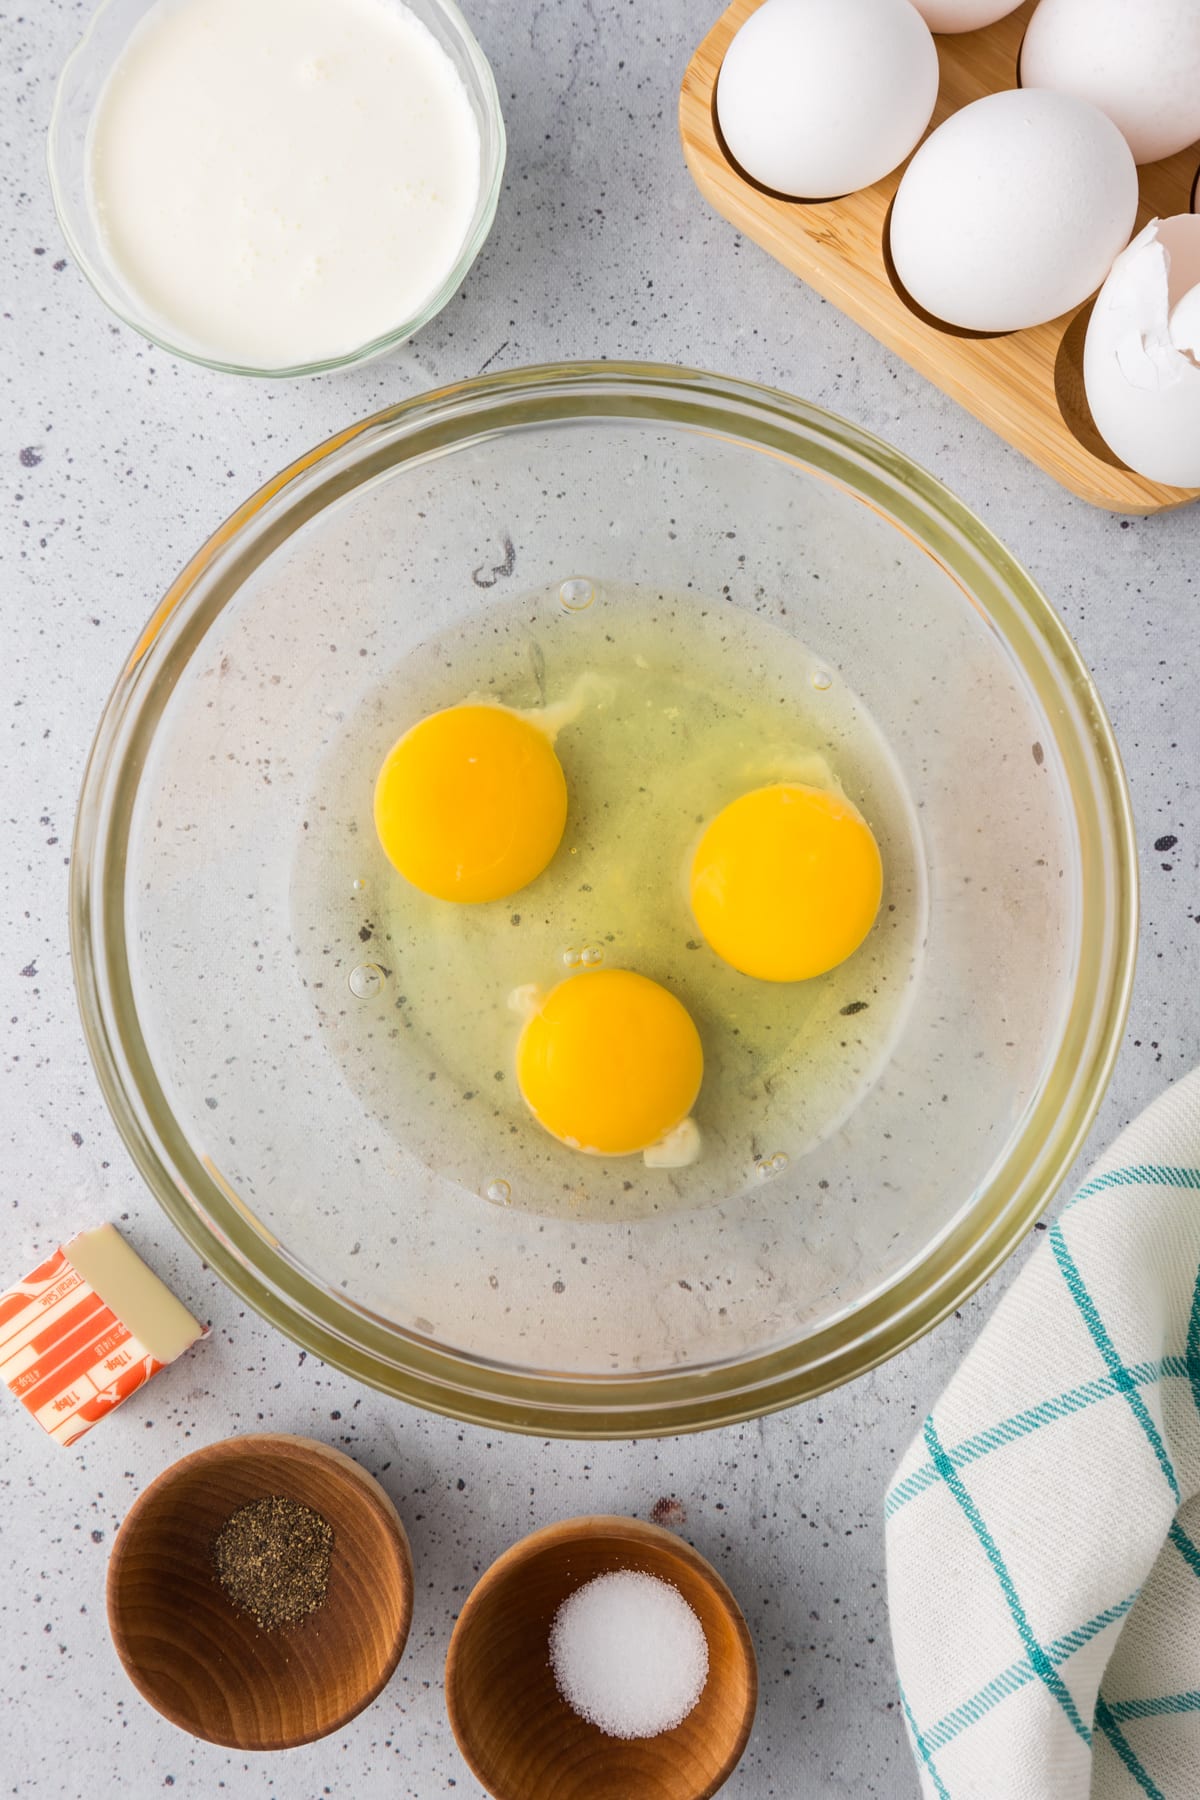 Three eggs cracked into a clear bowl.